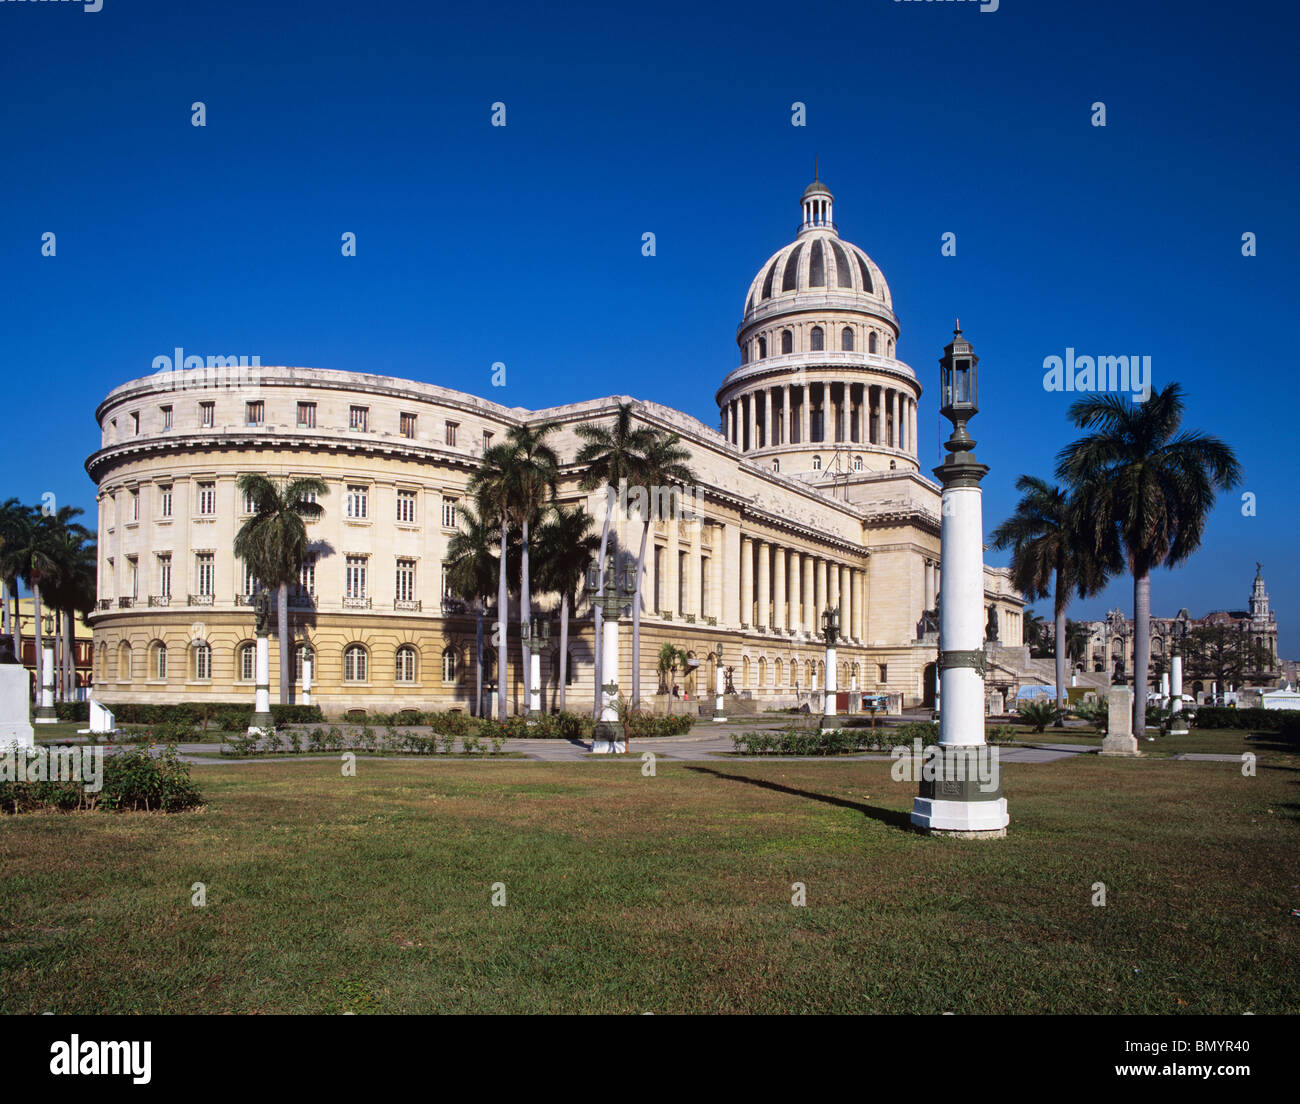 Collection 100+ Images what is the capital city of cuba? Stunning